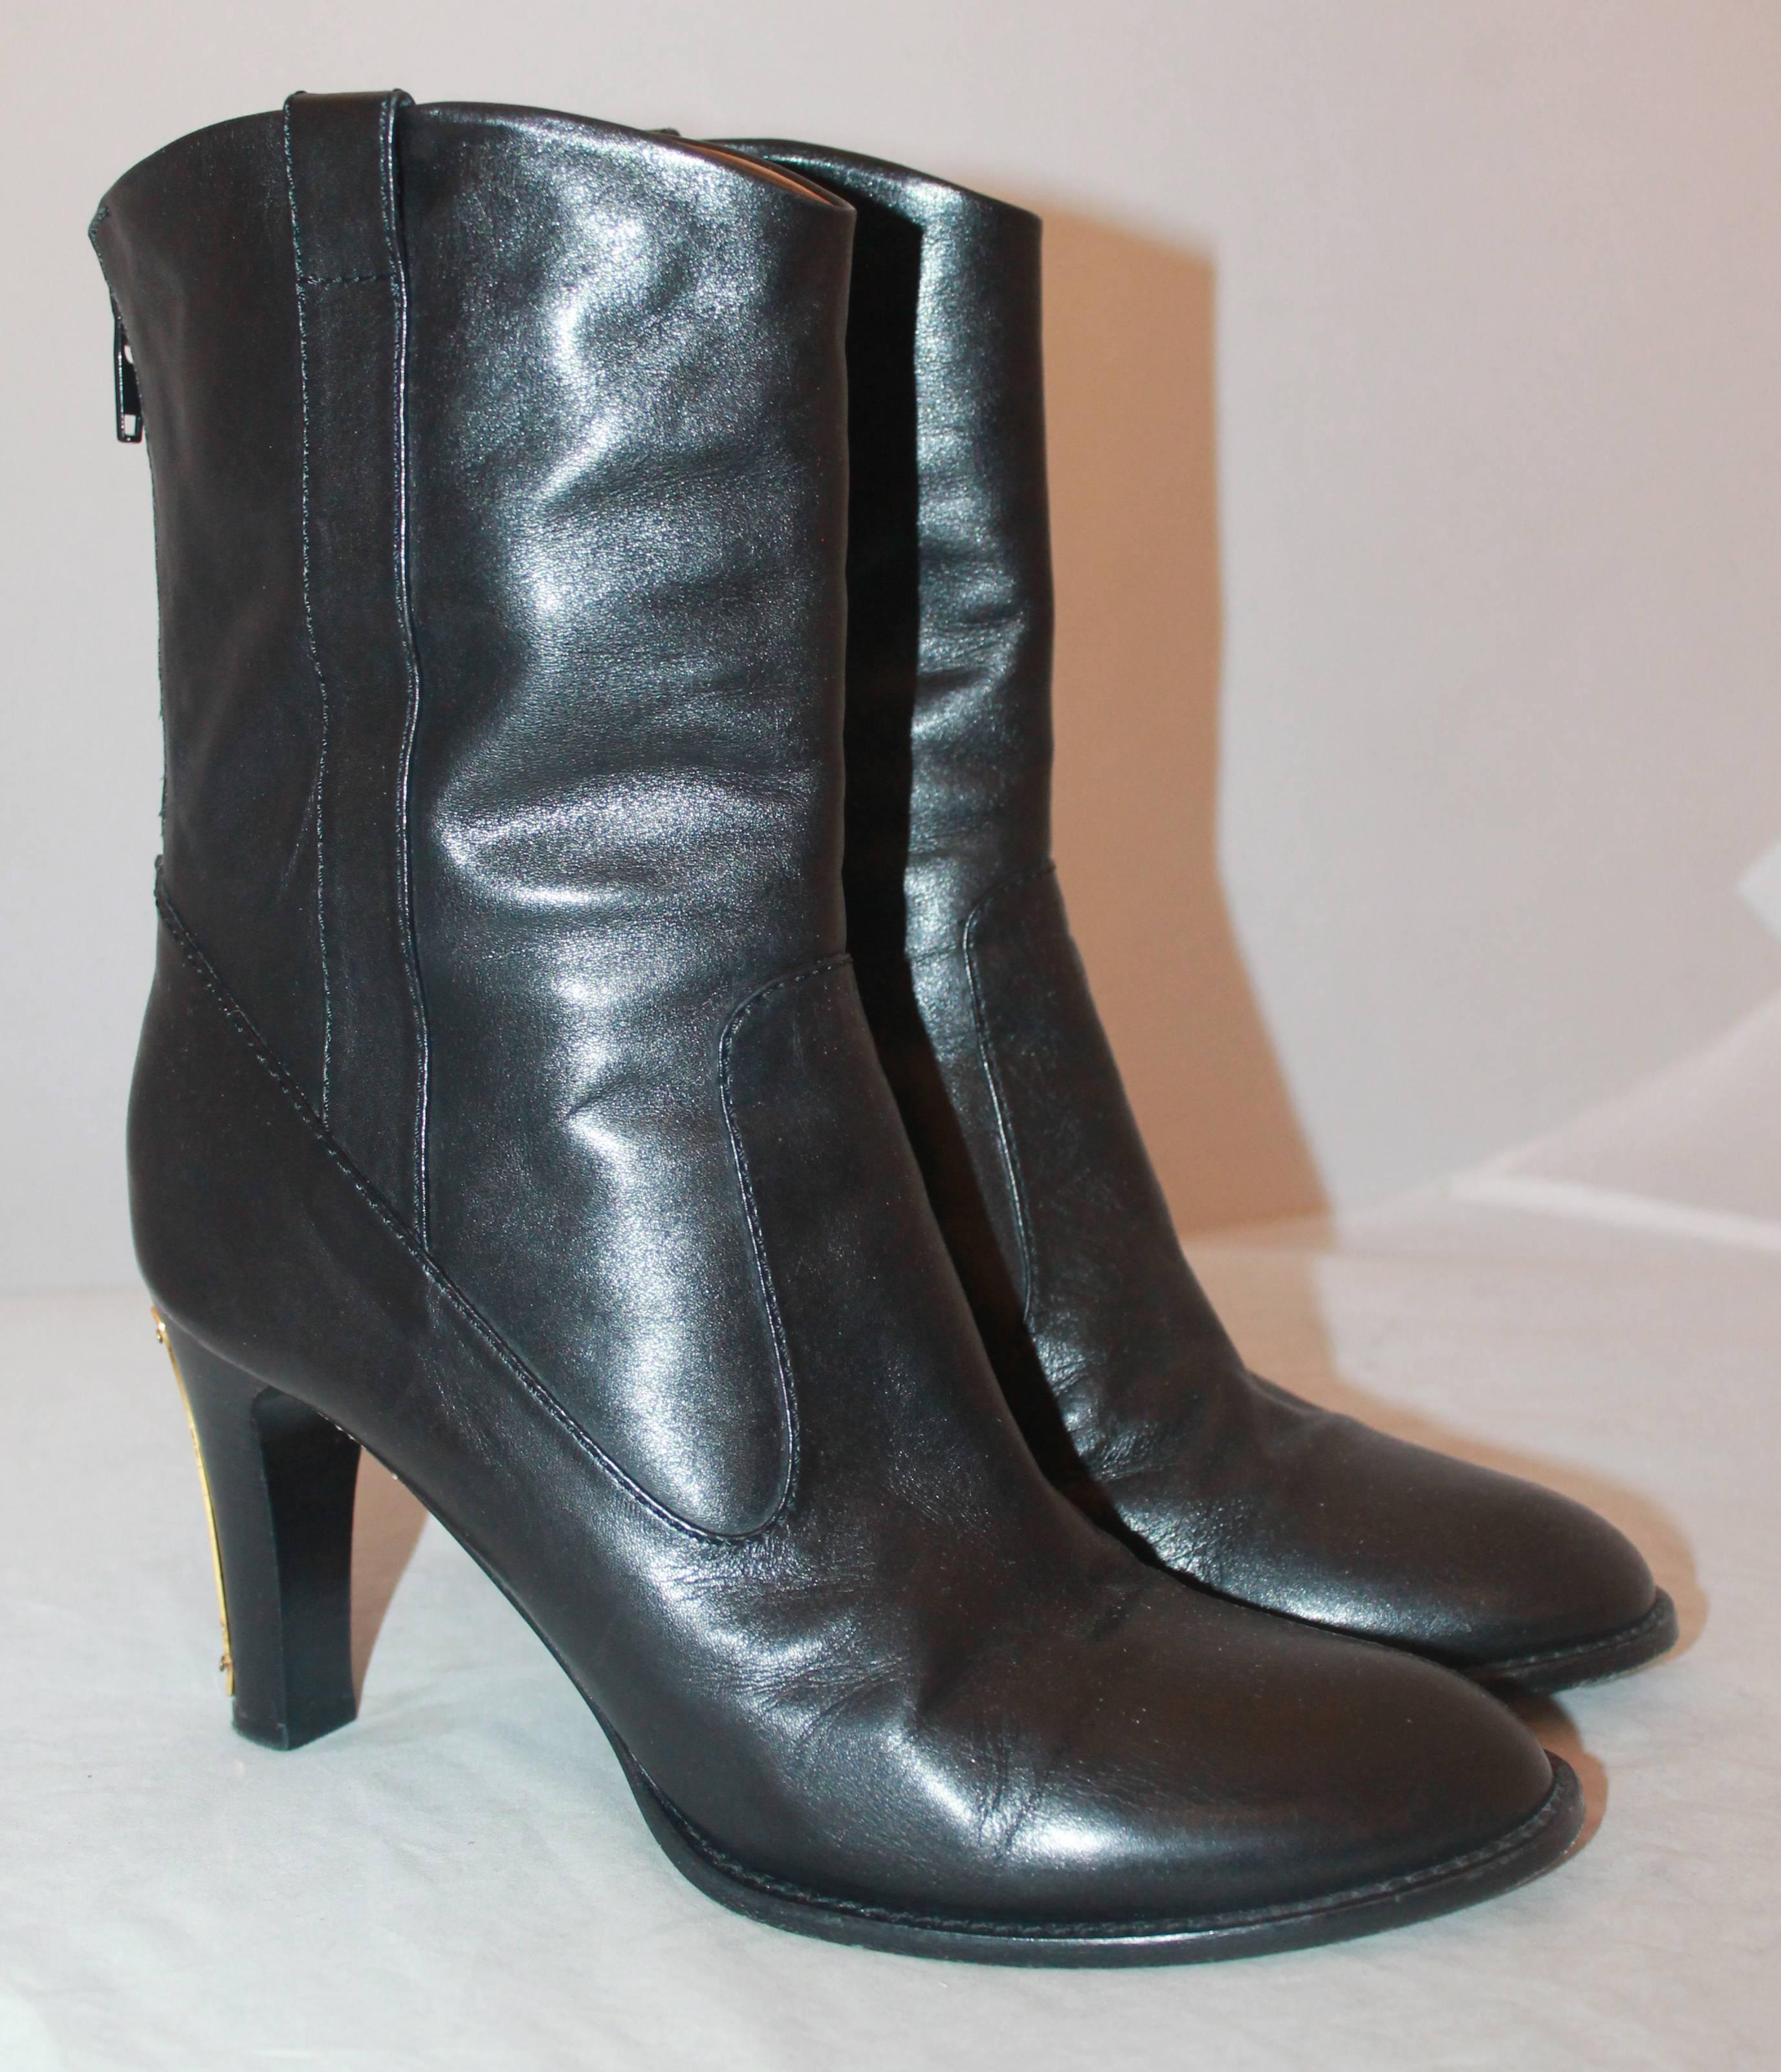 Chloe Black Leather Boots with Gold Detail - 38.5. These beautiful boots are the perfect piece for the cold seasons. They have a sleek design with a back zipper and gold detail on the back of the heels. The boots are in good condition with some